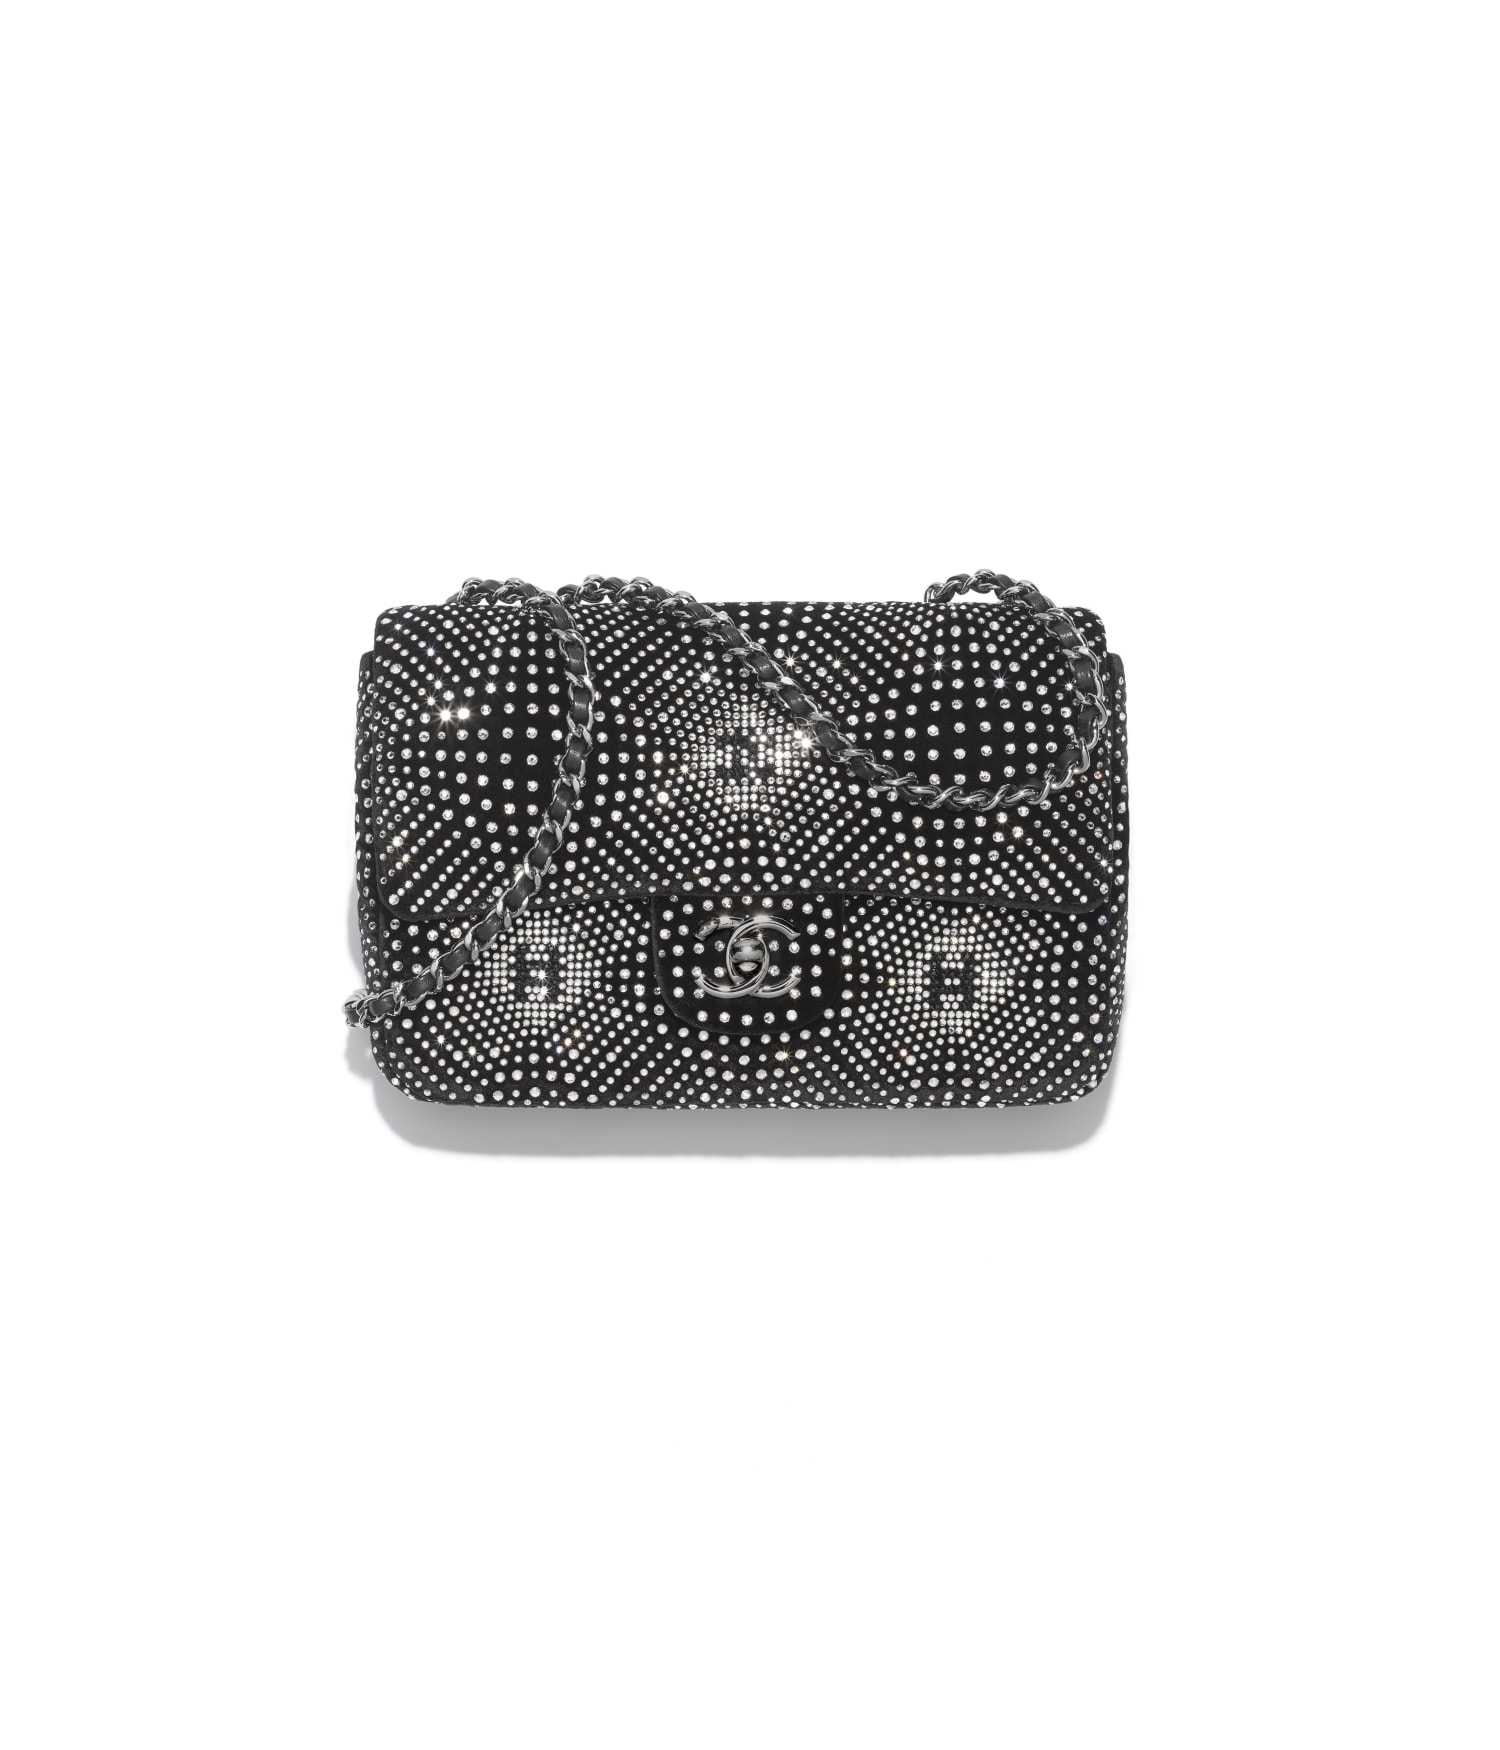 chanel_bag-in-black-velvet-silver-strass-and-metal-as4297-b14861-nt393-hd-LD